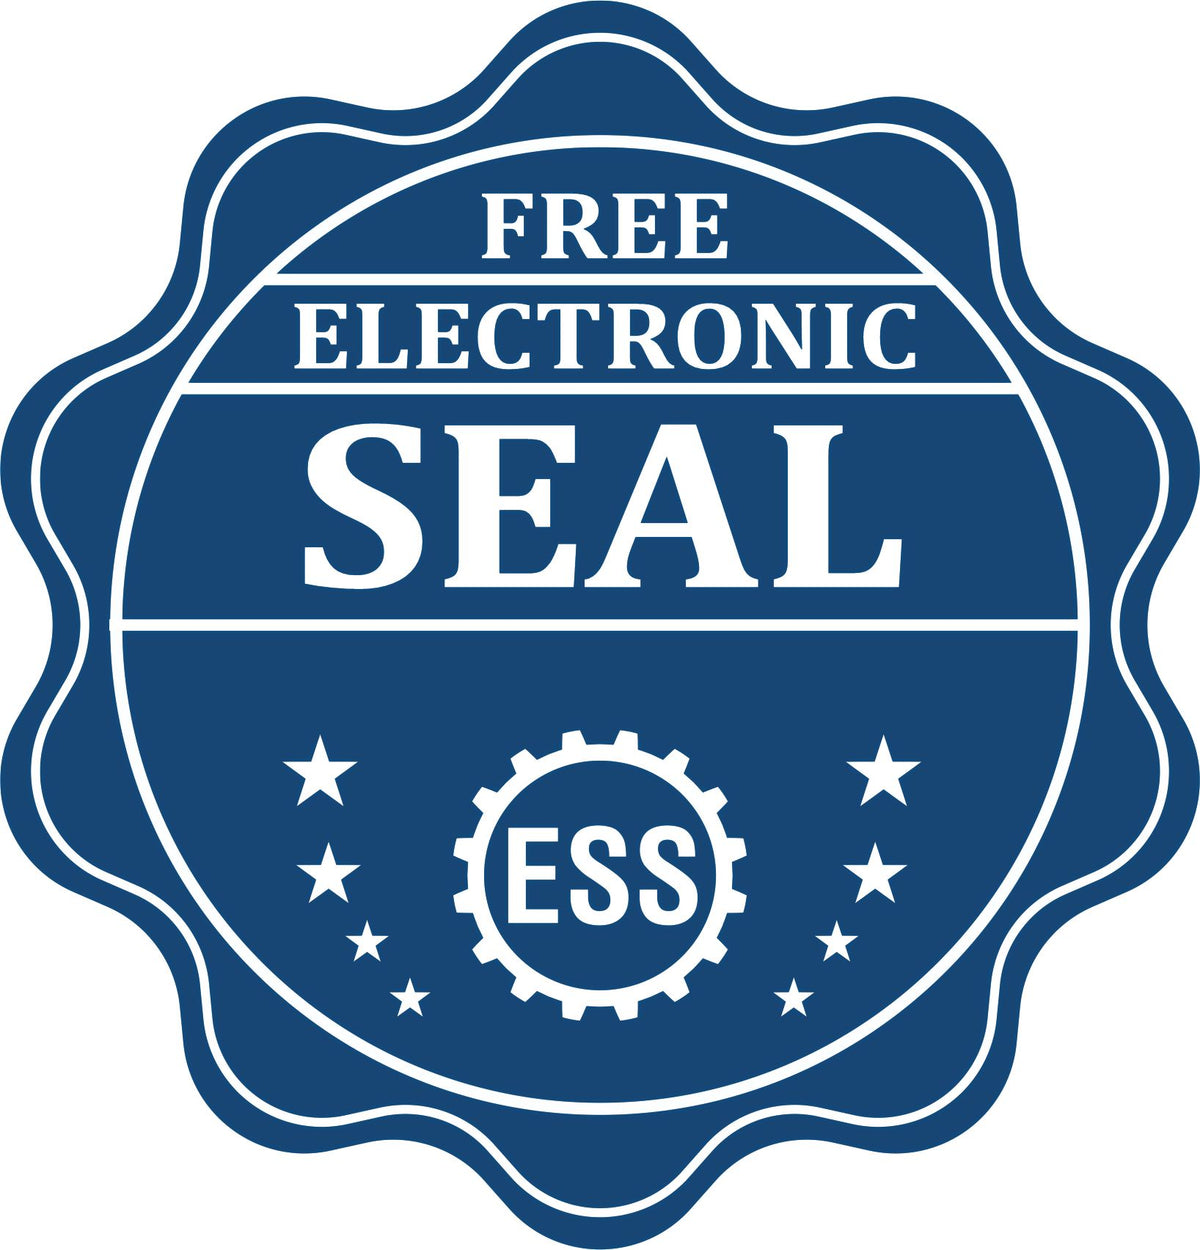 A badge showing a free electronic seal for the Long Reach New York PE Seal with stars and the ESS gear on the emblem.